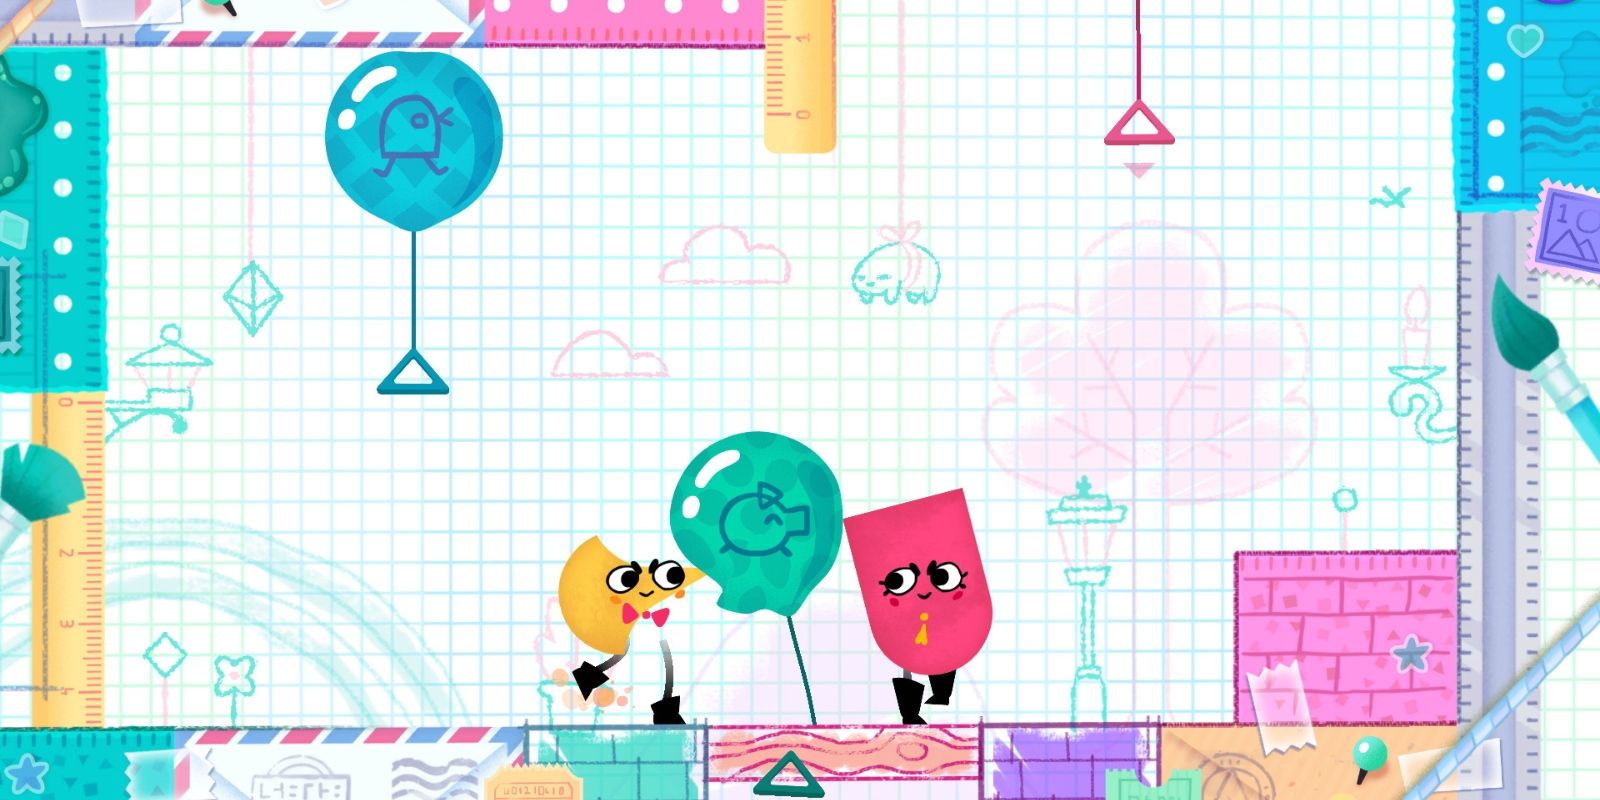 Snipperclips Making Shapes With A Graph Paper-Style Art Background